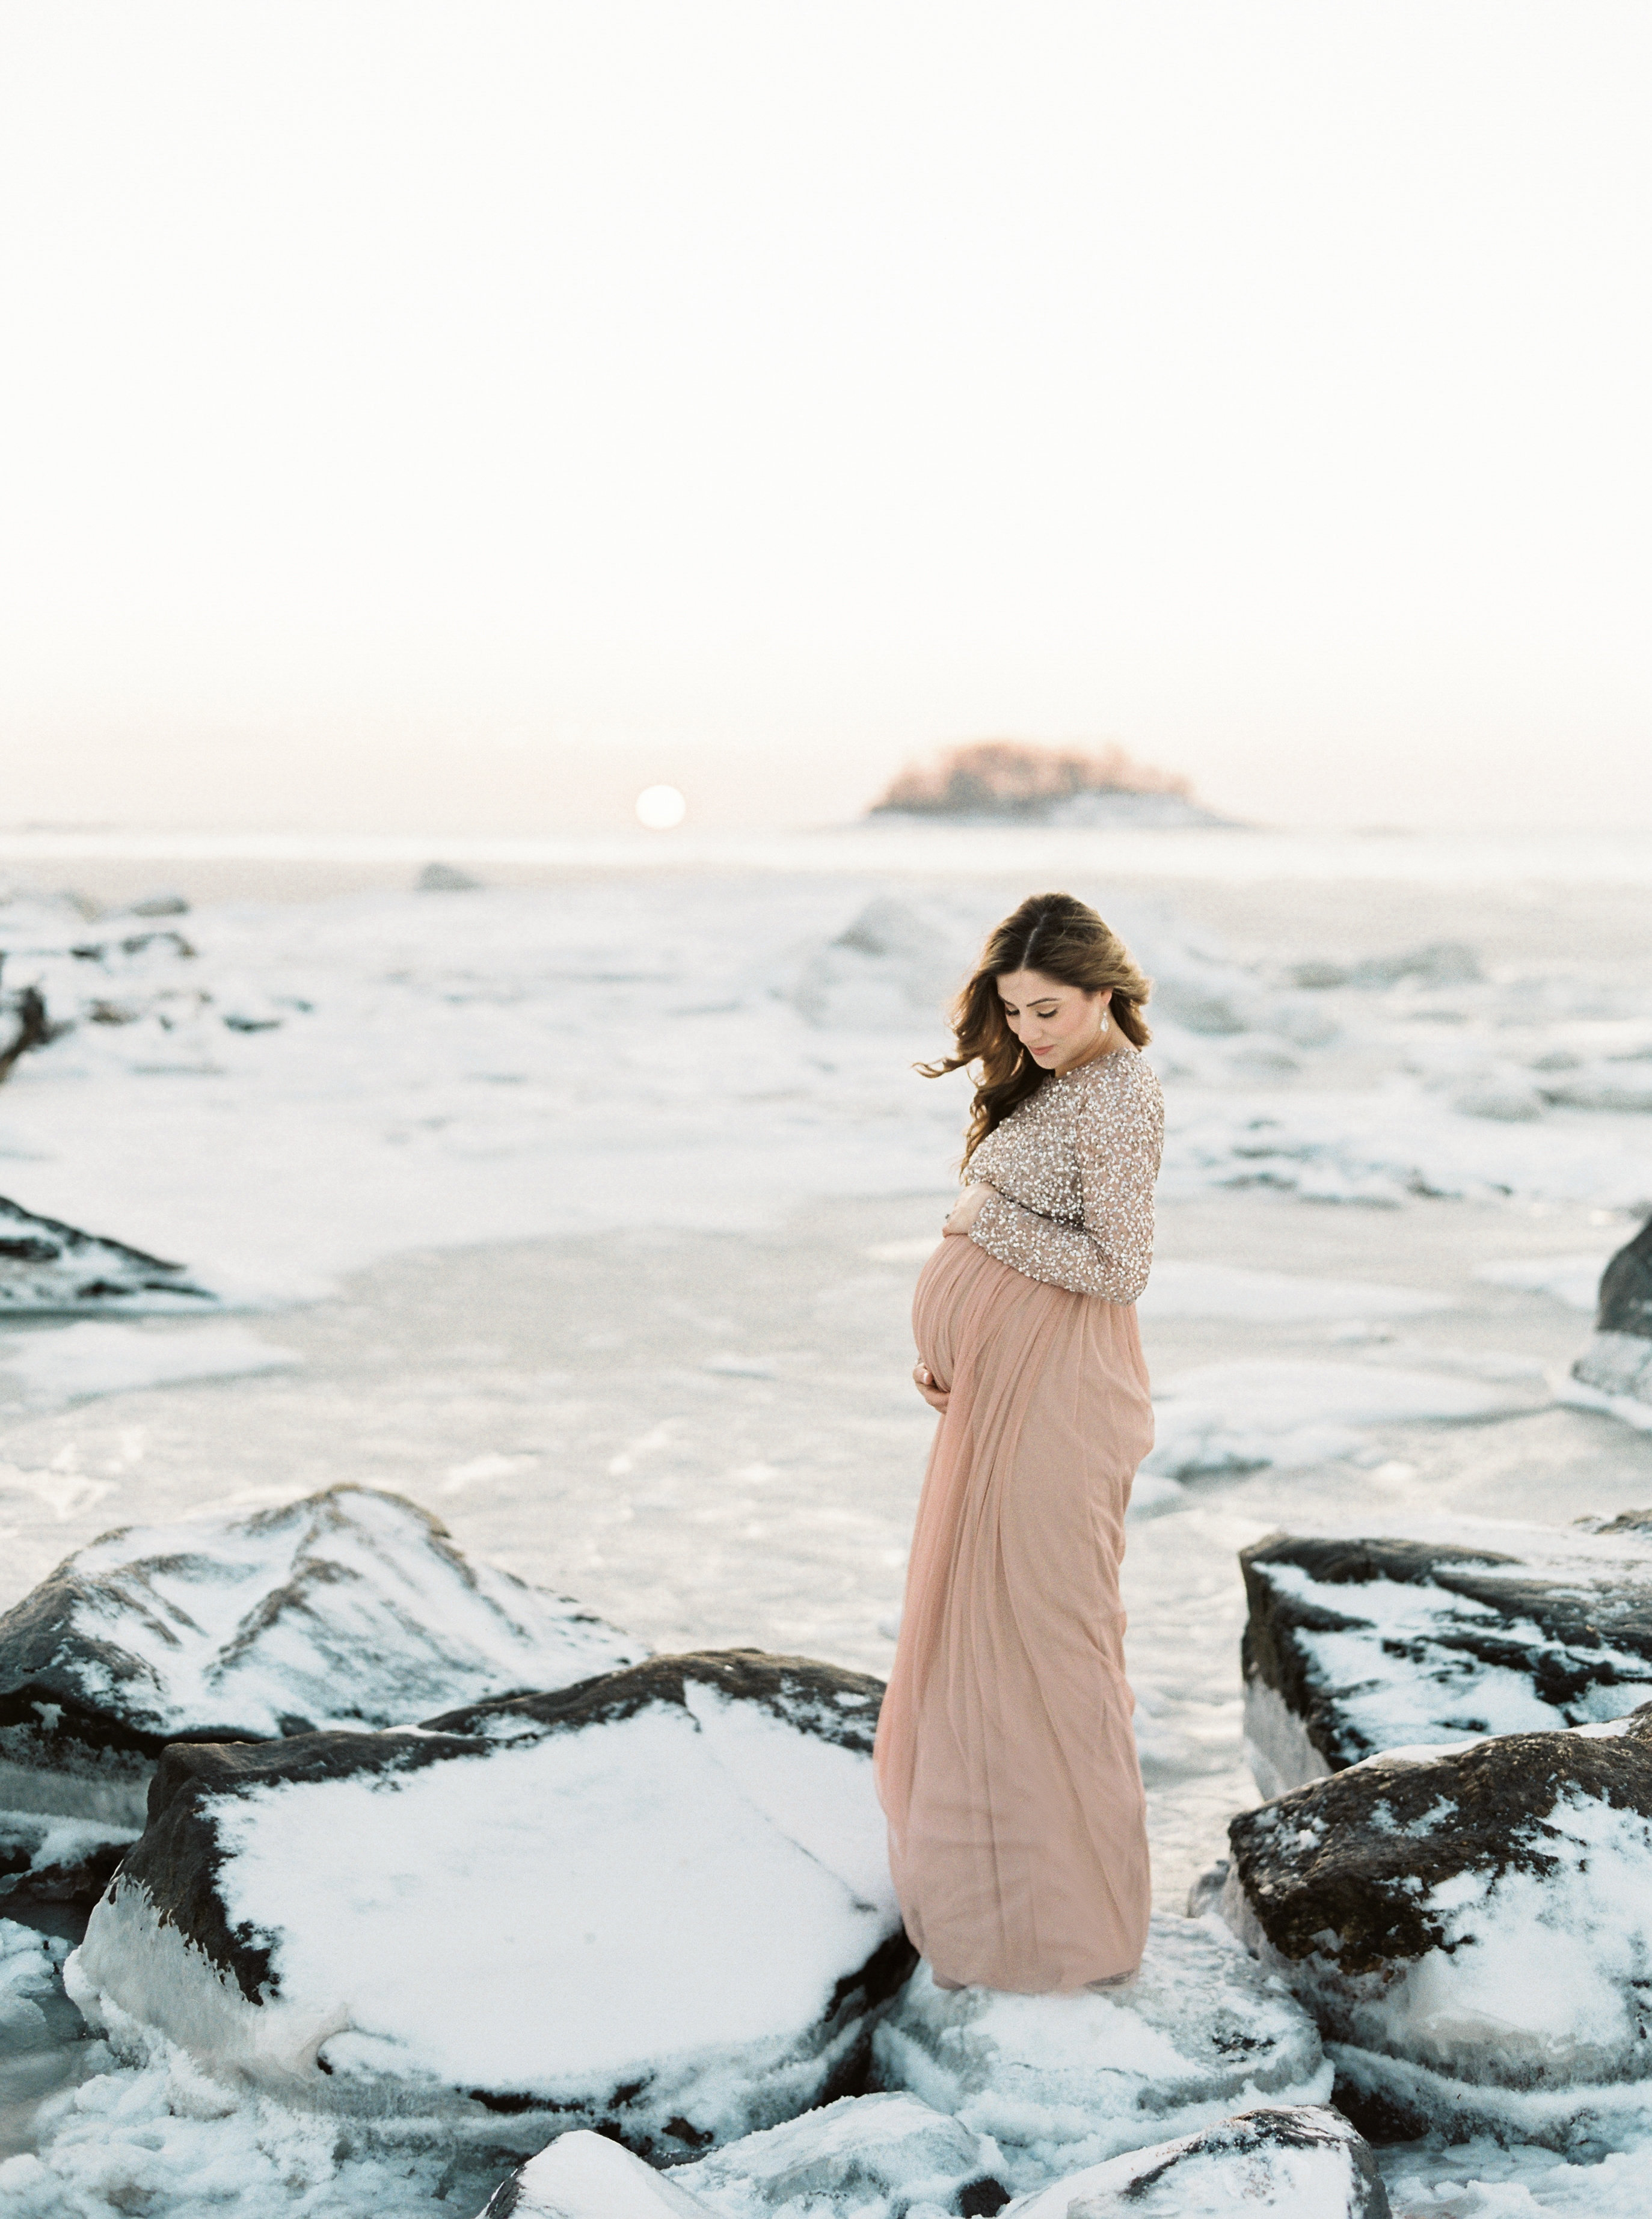 Life and style blogger Lauren McBride shares What to Wear for a Winter Maternity shoot, including tips on selecting clothing to layering for the session.